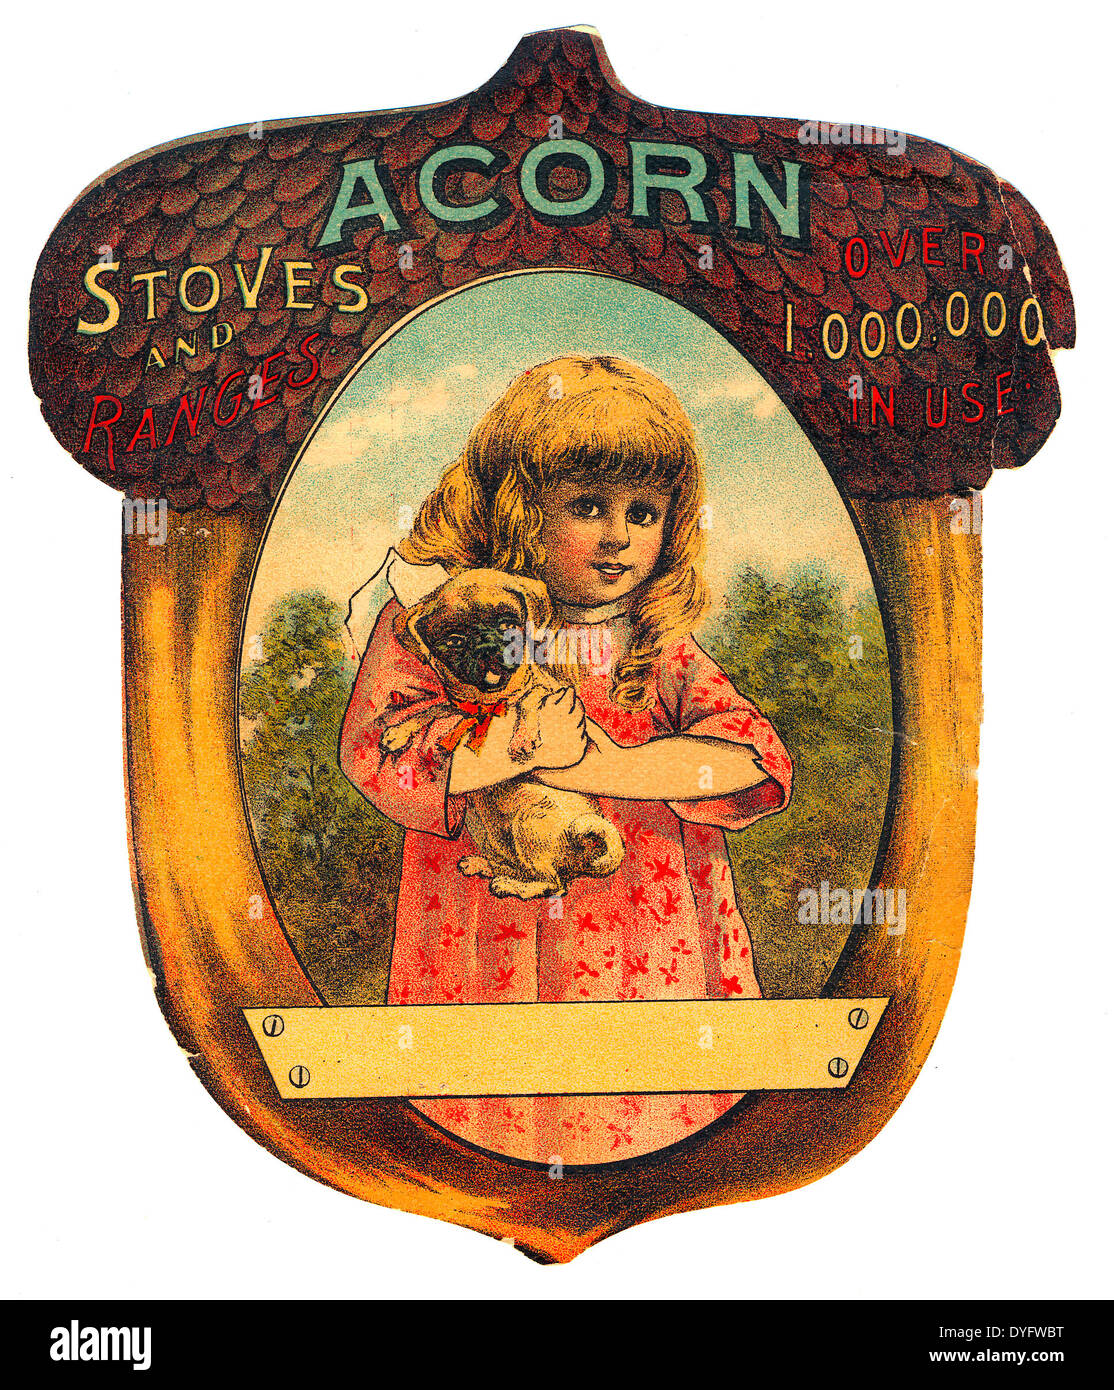 Advertisement for Acorn stoves and ranges - over 1,000,000 in use, circa 1886 Stock Photo